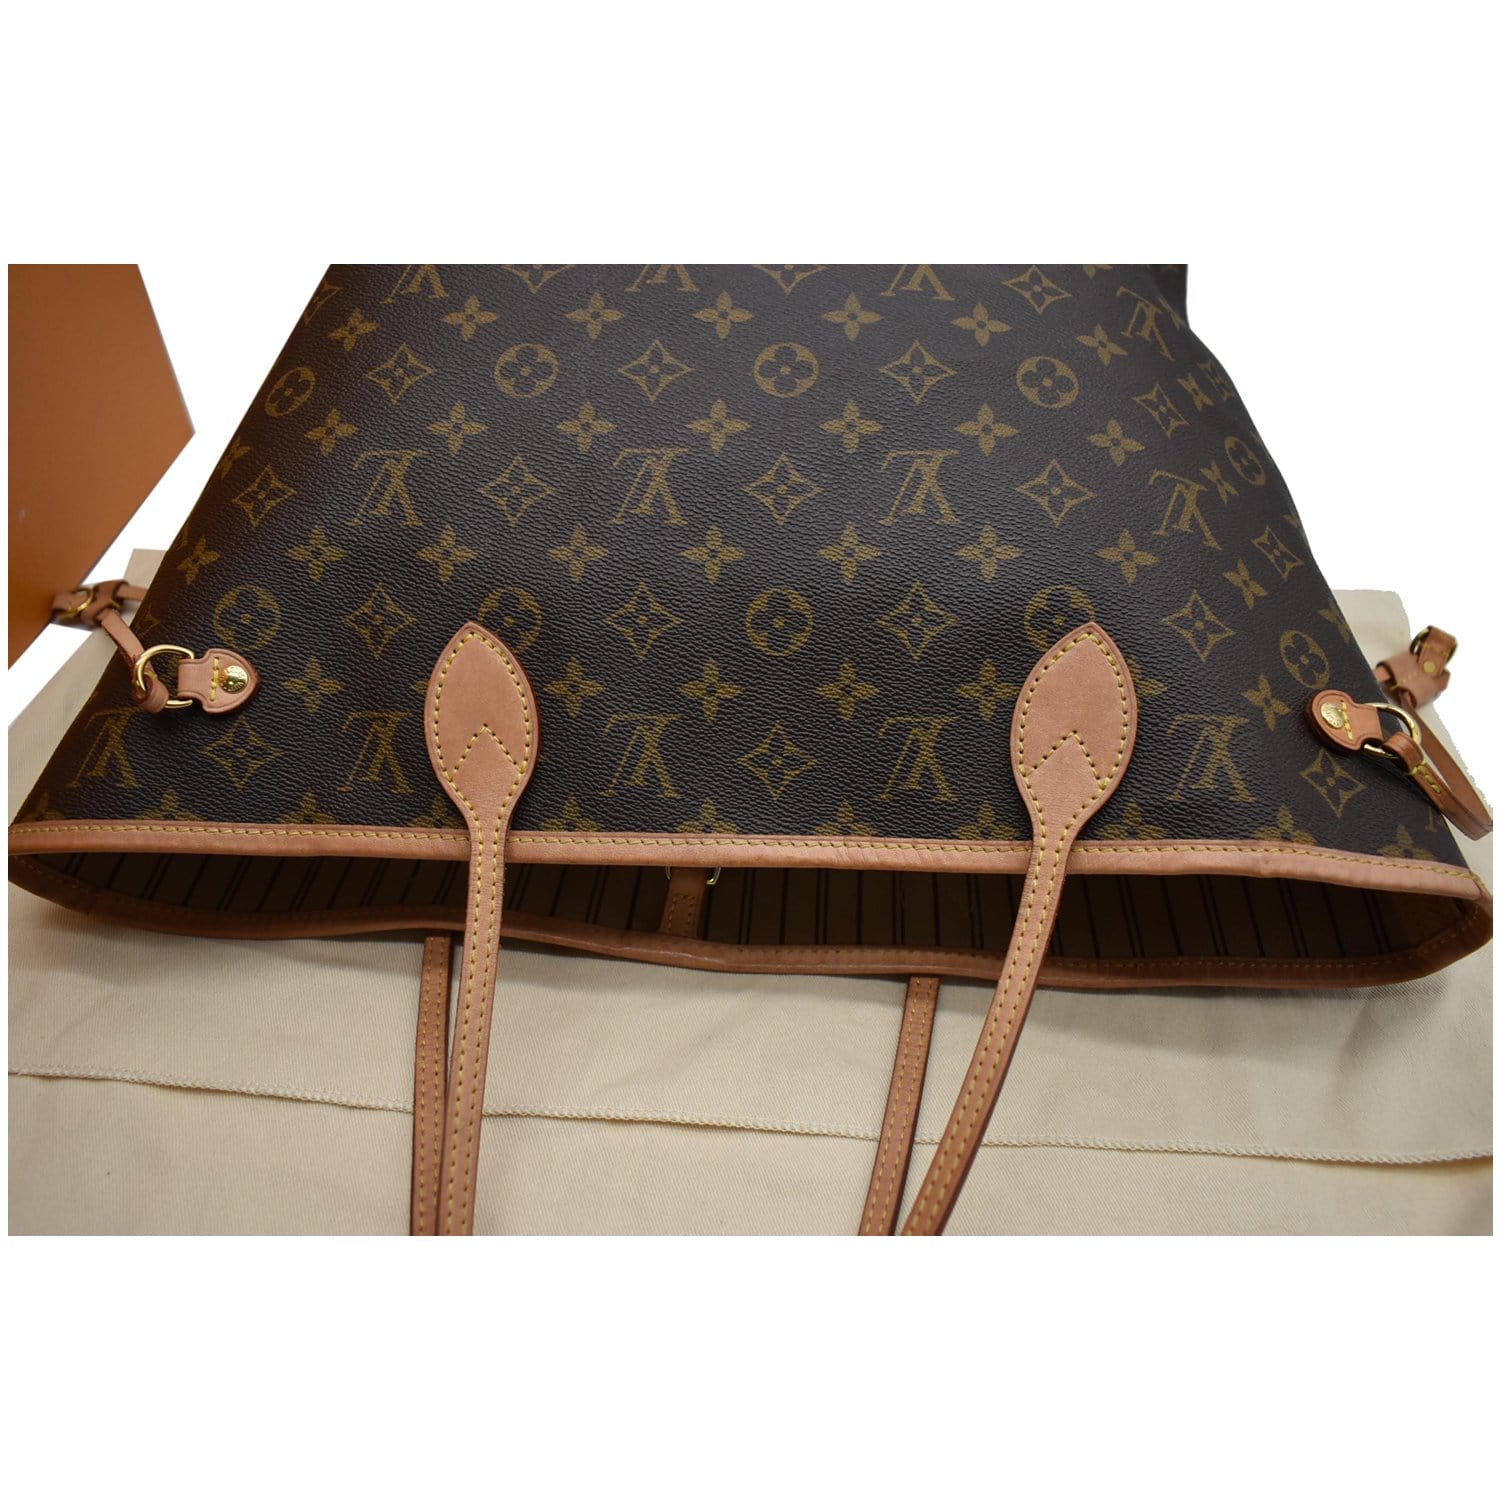 LOUIS VUITTON Monogram Neverfull MM Tote Bag Brown Turquoise M41601 90192196